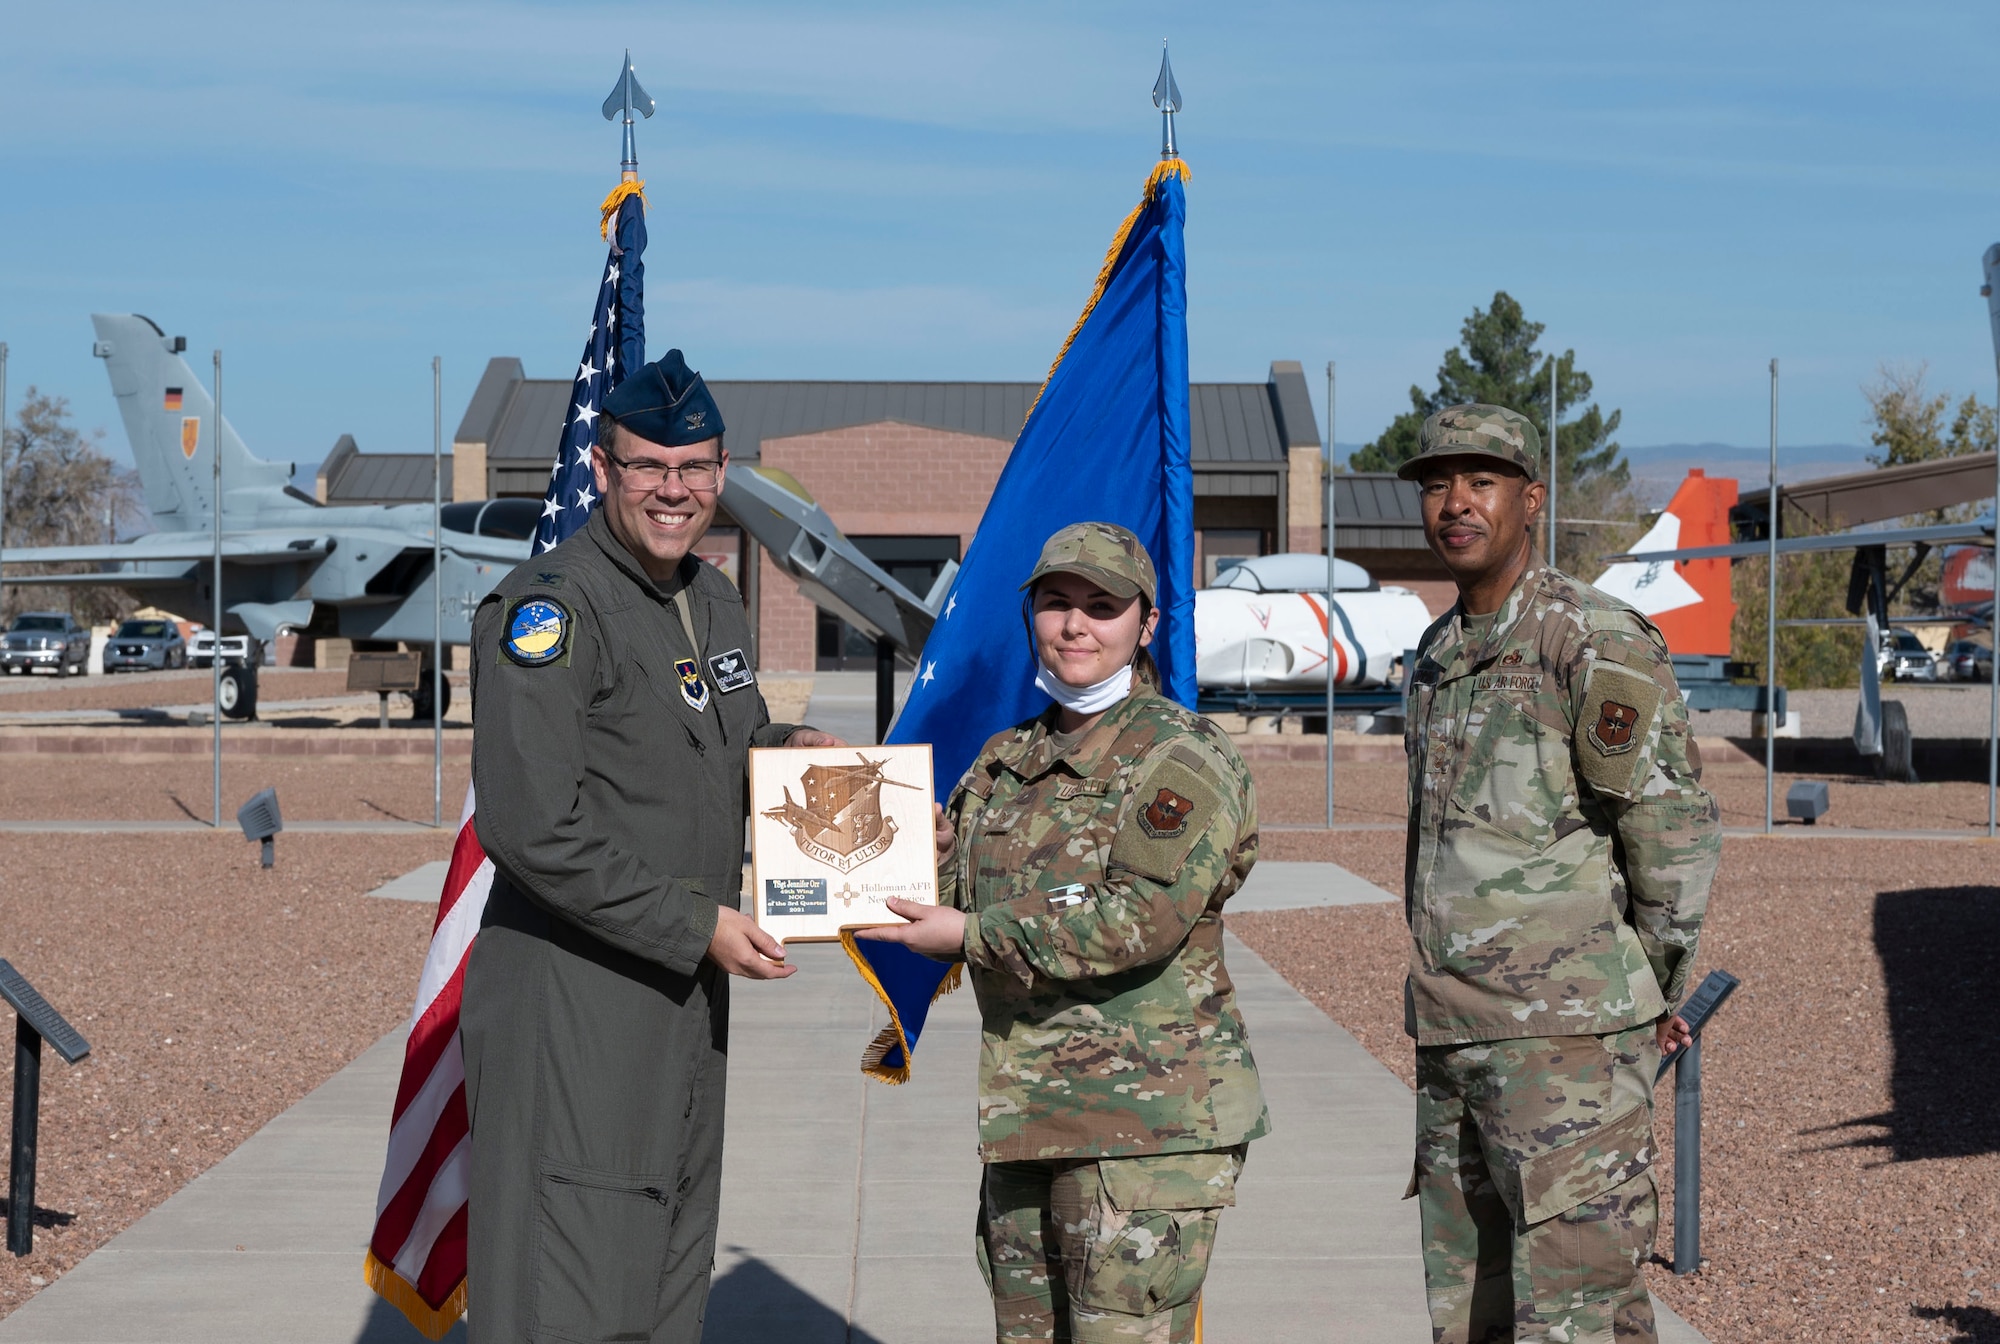 Tech. Sgt. Jennifer Orr, quarterly award winner, accepts the noncommissioned officer of the quarter award during the 49th Wing’s 3nd quarter award ceremony, Nov. 19, 2021, on Holloman Air Force Base, New Mexico. Quarterly award winners were selected based on their technical expertise, demonstration of leadership and job performance. (U.S. Air Force photo by Airman 1st Class Antonio Salfran)